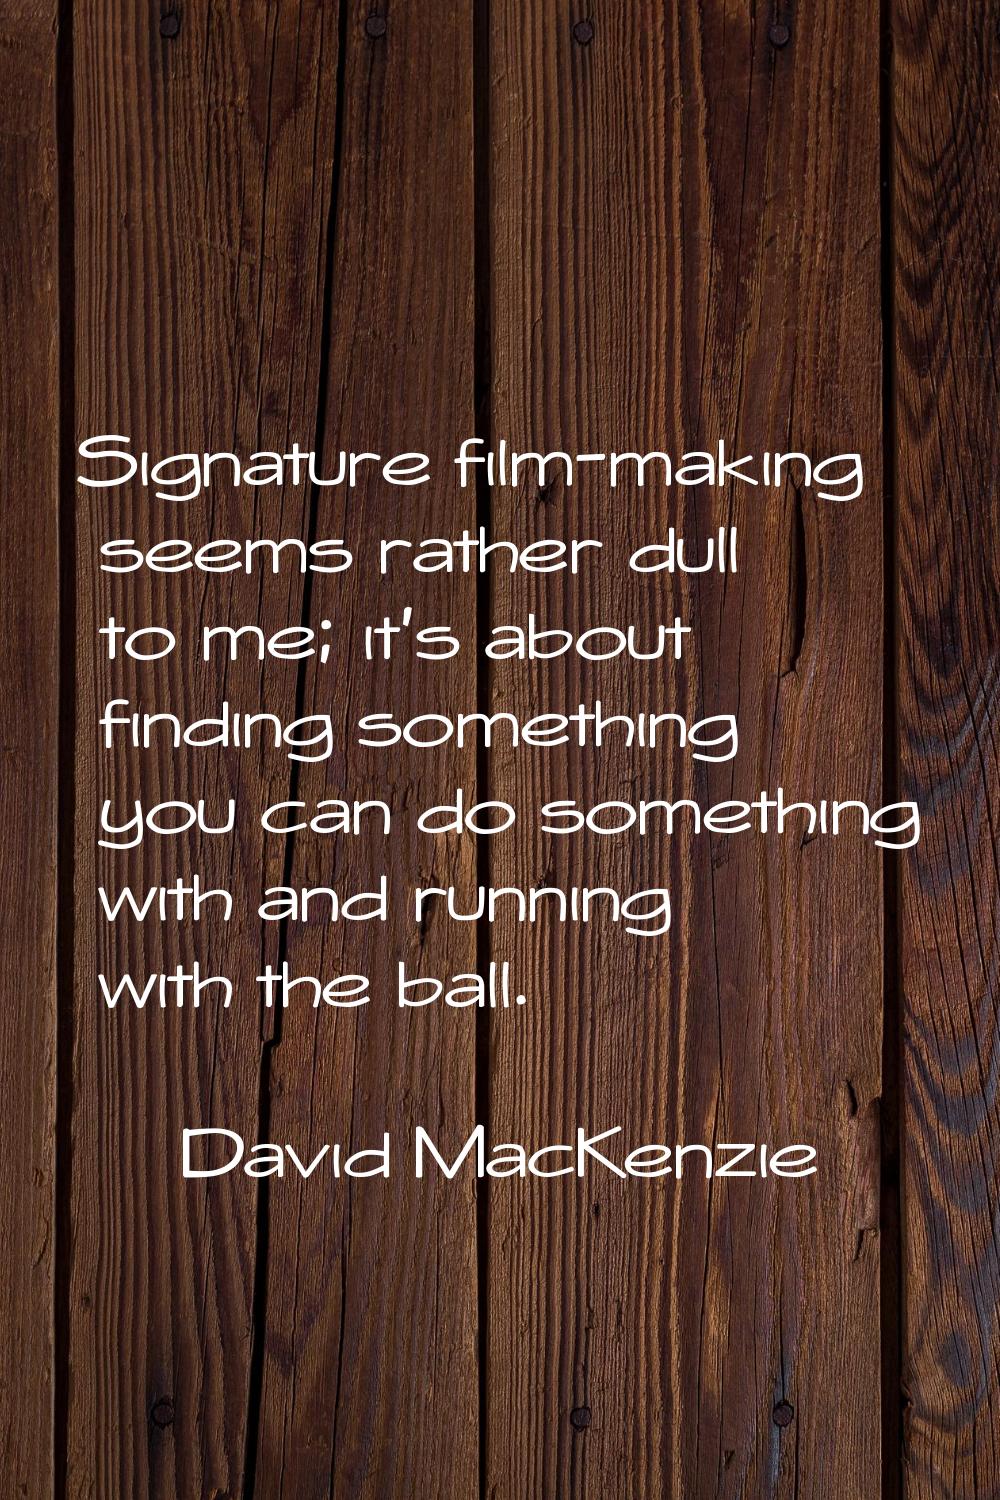 Signature film-making seems rather dull to me; it's about finding something you can do something wi